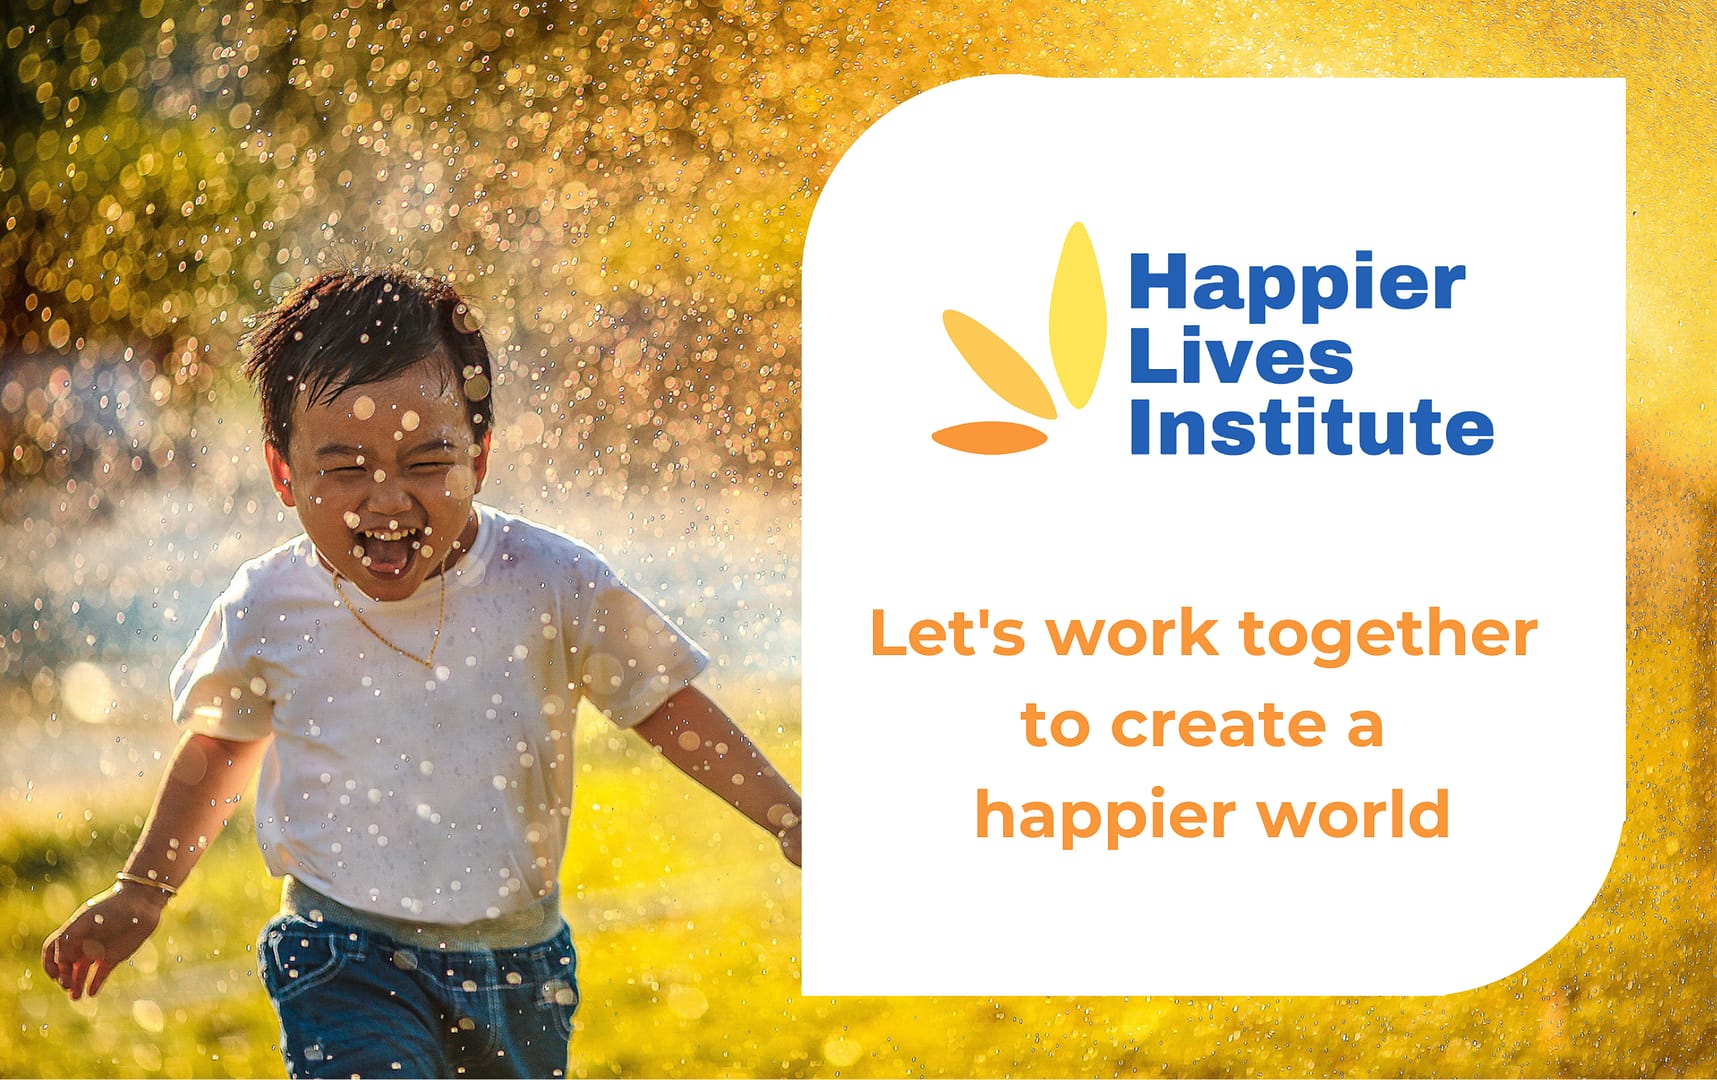 Let's work together to create a happier world